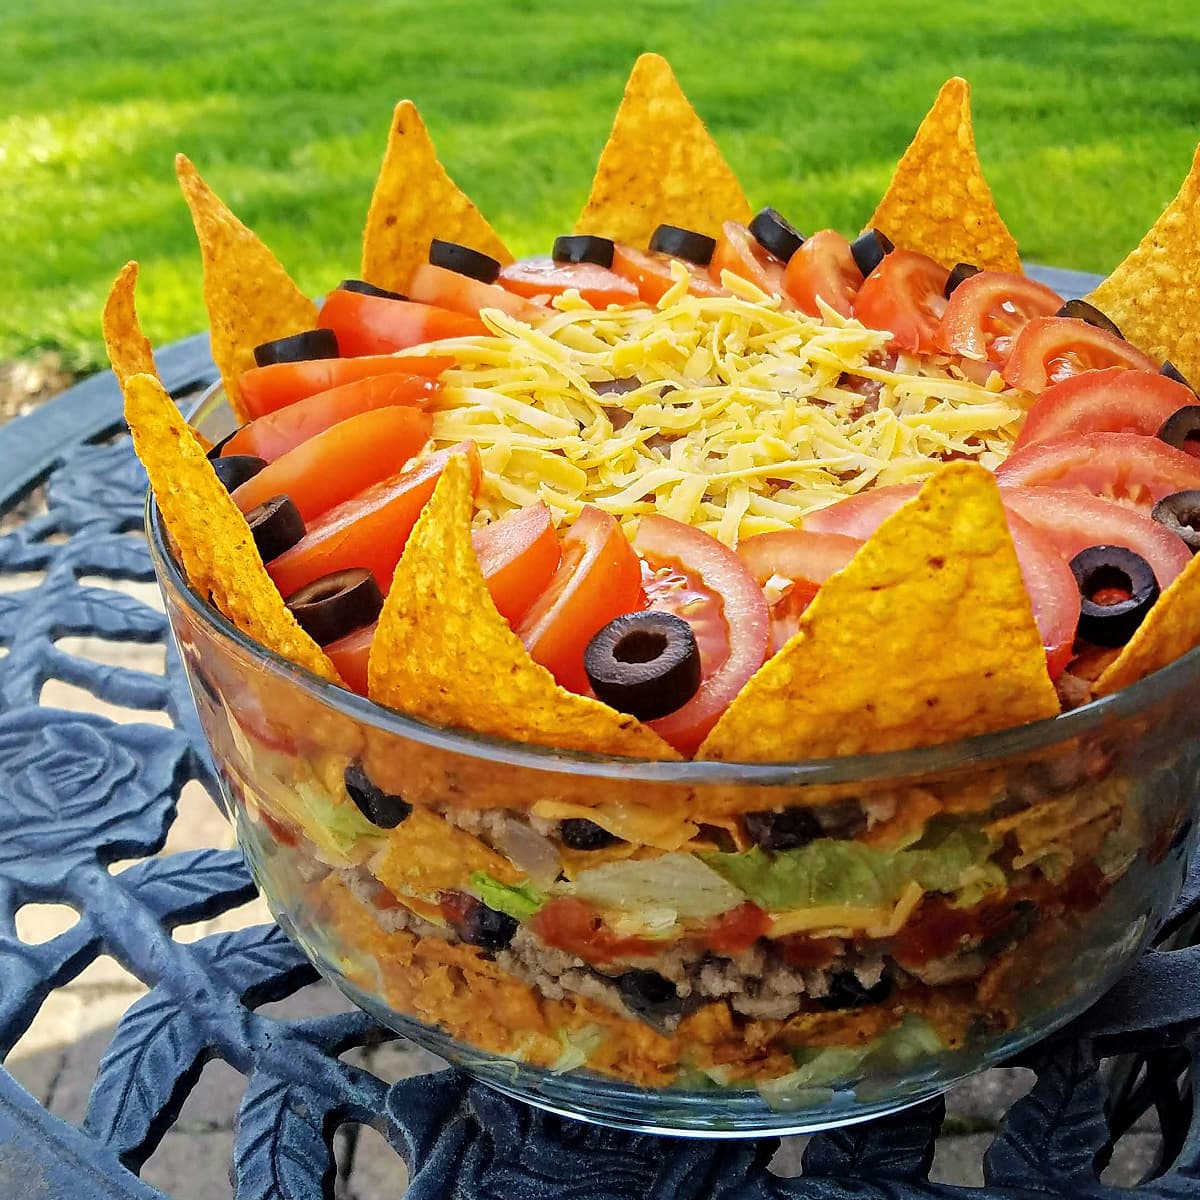 Layered taco sald in a large glass serving bowl, sitting on a wrought-iron bistro table. 